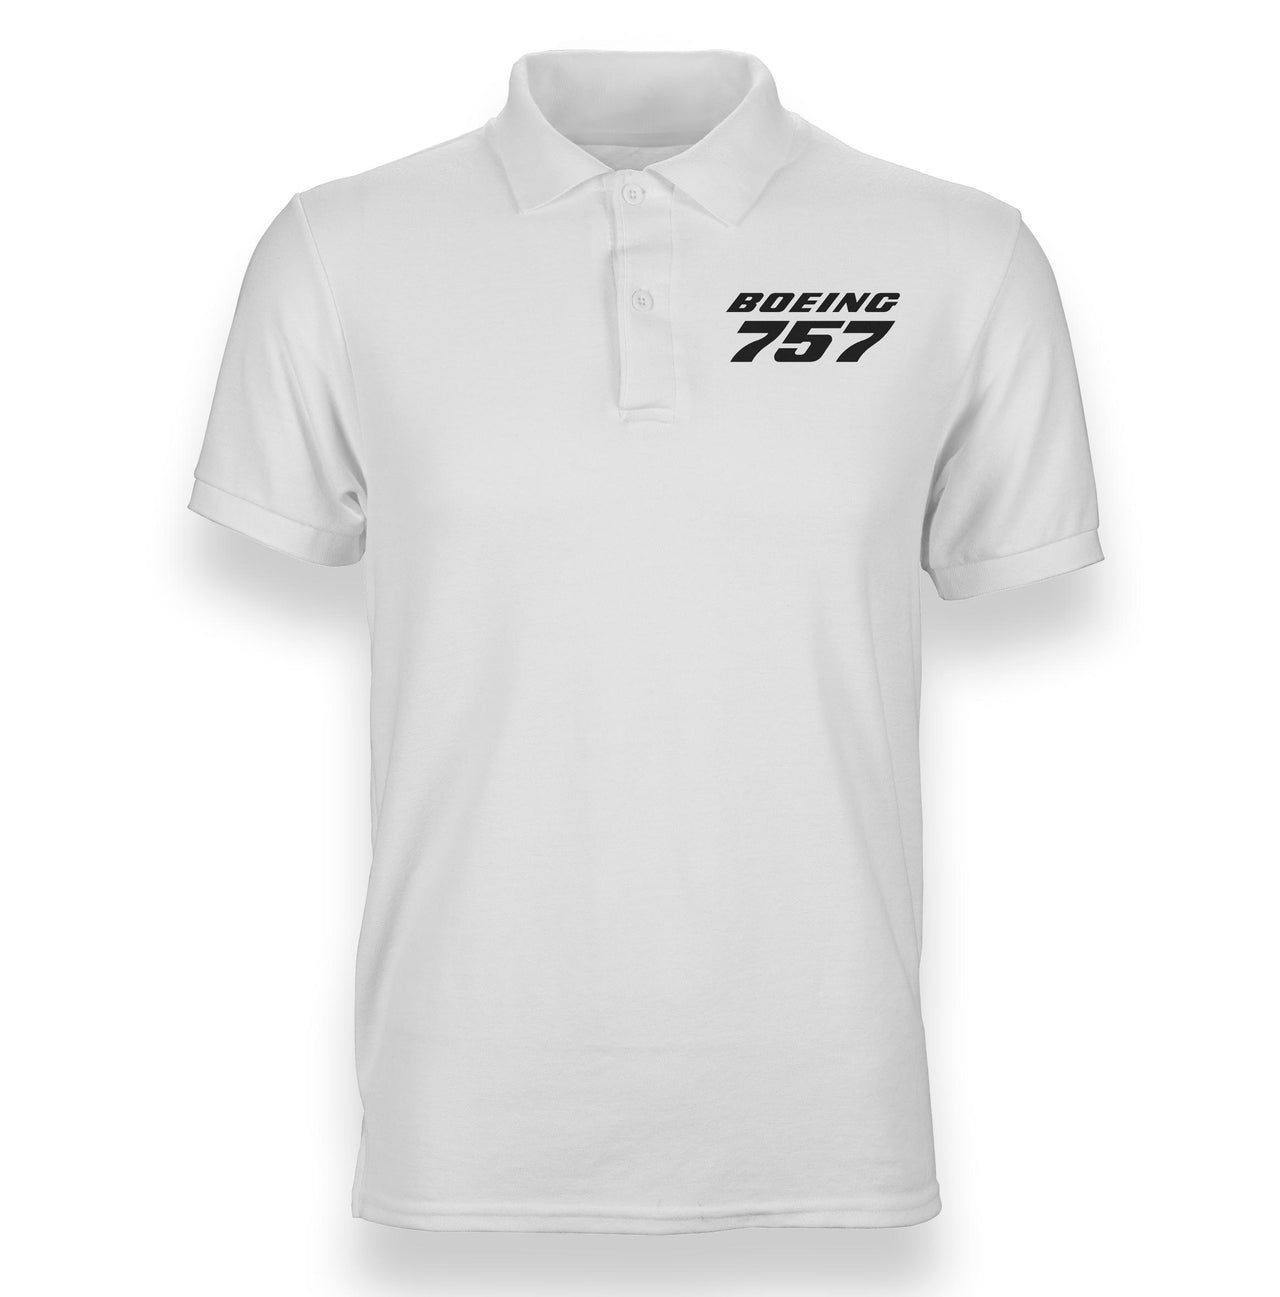 Boeing 757 & Text Designed Polo T-Shirts